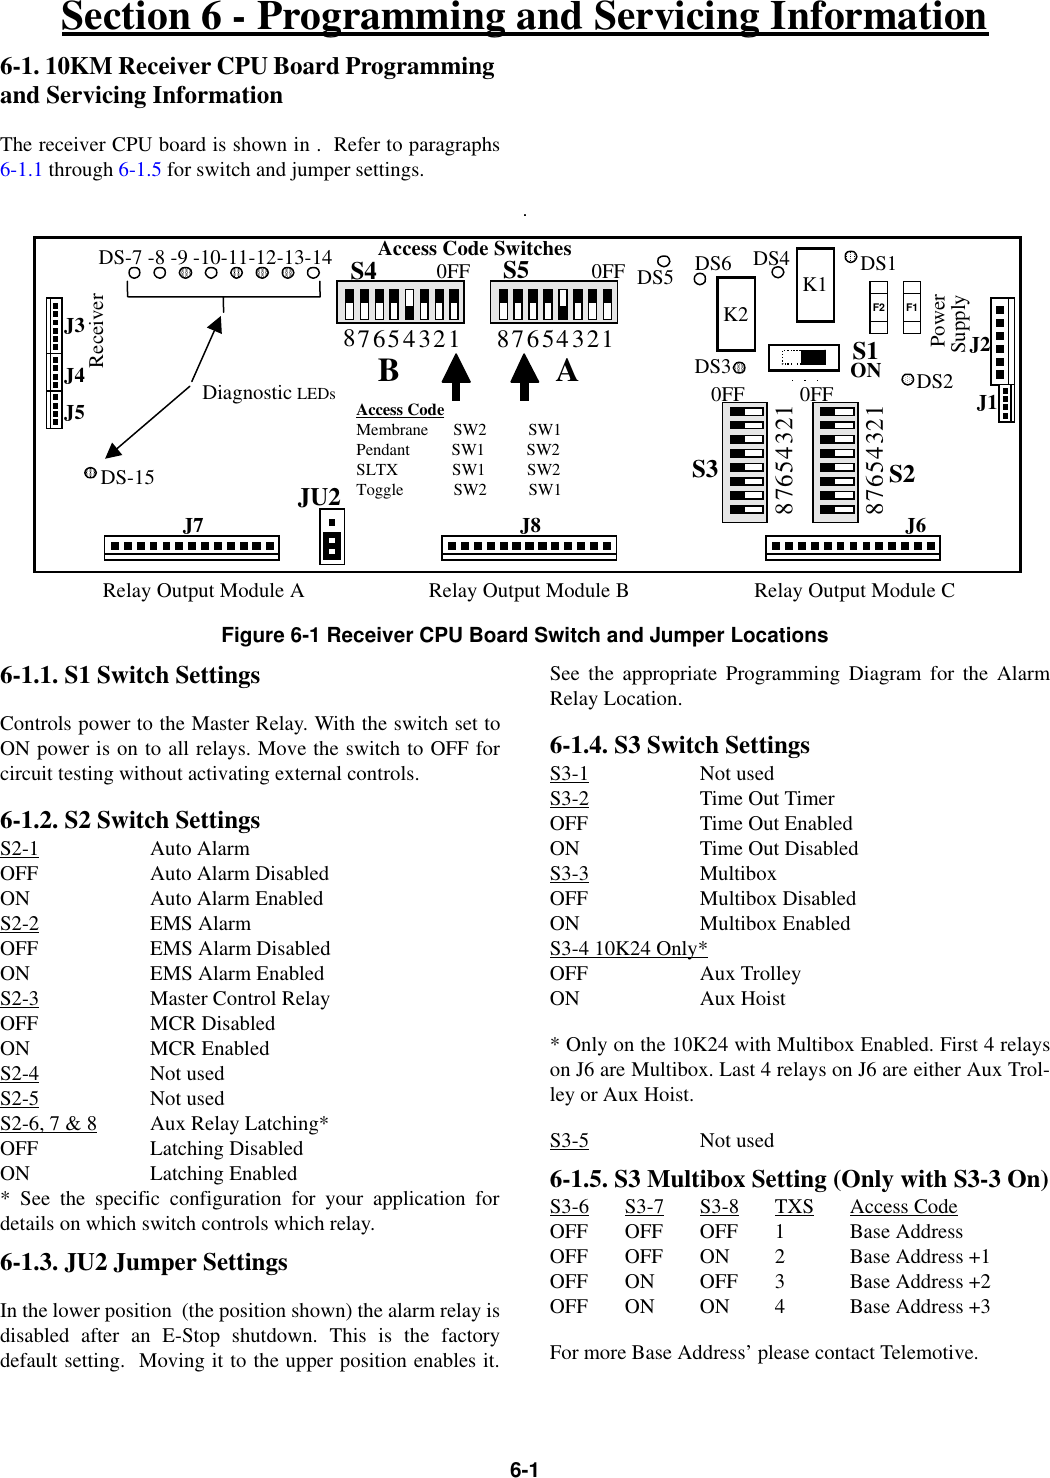 6-16-1. 10KM Receiver CPU Board Programming and Servicing InformationThe receiver CPU board is shown in .  Refer to paragraphs6-1.1 through 6-1.5 for switch and jumper settings..Figure 6-1 Receiver CPU Board Switch and Jumper Locations6-1.1. S1 Switch SettingsControls power to the Master Relay. With the switch set toON power is on to all relays. Move the switch to OFF forcircuit testing without activating external controls.6-1.2. S2 Switch SettingsS2-1 Auto AlarmOFF Auto Alarm DisabledON Auto Alarm EnabledS2-2 EMS AlarmOFF EMS Alarm DisabledON EMS Alarm EnabledS2-3 Master Control RelayOFF MCR DisabledON MCR EnabledS2-4 Not usedS2-5 Not usedS2-6, 7 &amp; 8 Aux Relay Latching*OFF Latching DisabledON Latching Enabled* See the specific configuration for your application fordetails on which switch controls which relay.6-1.3. JU2 Jumper SettingsIn the lower position  (the position shown) the alarm relay isdisabled after an E-Stop shutdown. This is the factorydefault setting.  Moving it to the upper position enables it.See the appropriate Programming Diagram for the AlarmRelay Location.6-1.4. S3 Switch SettingsS3-1 Not usedS3-2 Time Out TimerOFF Time Out EnabledON Time Out DisabledS3-3 MultiboxOFF Multibox DisabledON Multibox EnabledS3-4 10K24 Only*OFF Aux TrolleyON Aux Hoist* Only on the 10K24 with Multibox Enabled. First 4 relayson J6 are Multibox. Last 4 relays on J6 are either Aux Trol-ley or Aux Hoist.S3-5 Not used6-1.5. S3 Multibox Setting (Only with S3-3 On)S3-6 S3-7 S3-8 TXS Access CodeOFF OFF OFF 1 Base AddressOFF OFF ON 2 Base Address +1OFF ON OFF 3 Base Address +2OFFONON4 Base Address +3For more Base Address’ please contact Telemotive.Relay Output Module A Relay Output Module B Relay Output Module CDS-15DS2K1S1ONDS5 DS4 DS1DS3J7 J8 J6Receiver87654321876543210FF 0FFS3 S2Access CodeMembrane      SW2          SW1Pendant          SW1          SW2SLTX             SW1          SW2Toggle            SW2          SW10FF87654321S587654321S4 0FFAccess Code SwitchesDS-7 -8 -9 -10-11-12-13-14J3J4J5JU2J2J1PowerSupplyDiagnostic LEDsK2DS6BAF2 F1Section 6 - Programming and Servicing Information